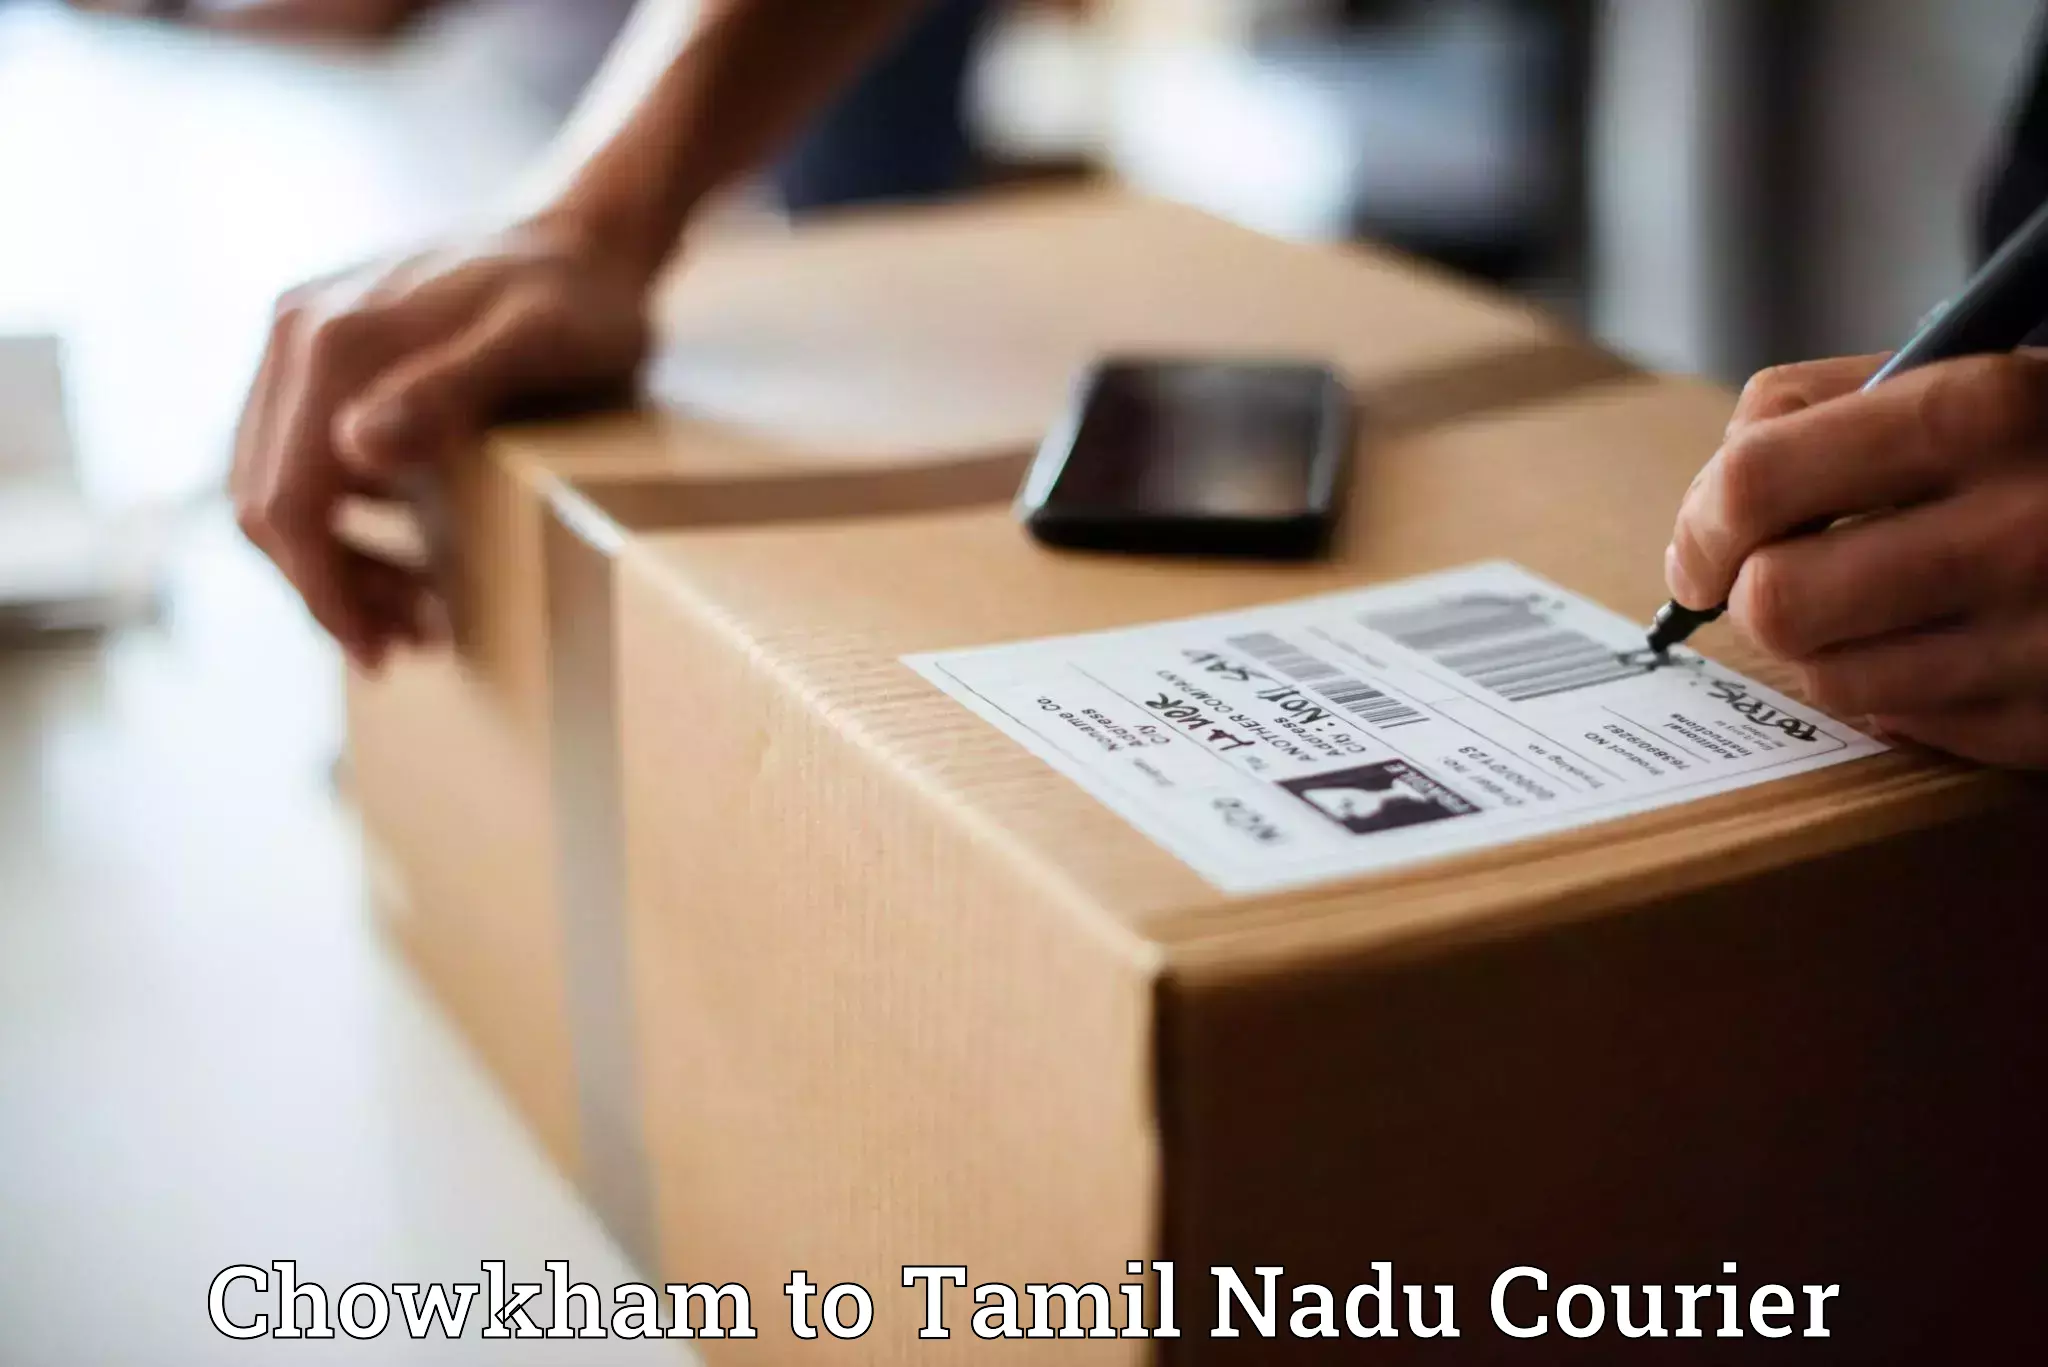 Secure package delivery Chowkham to Tiruvannamalai